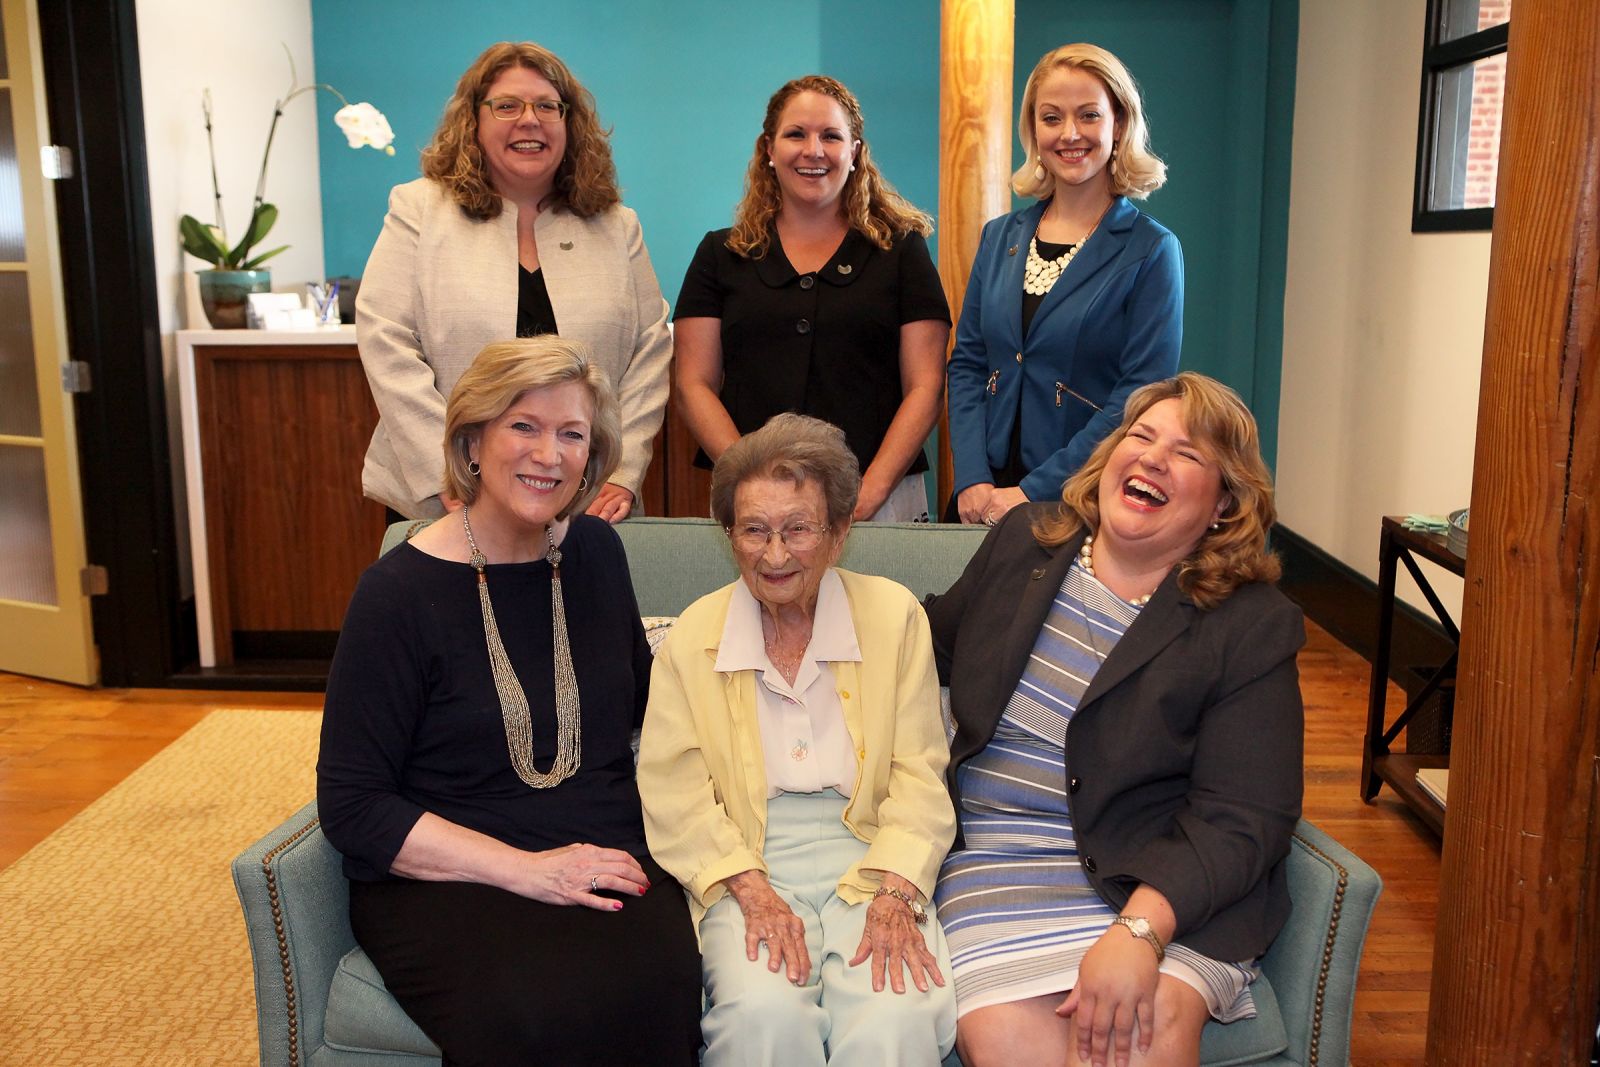 Sarah Leverette (seated, center) visits the Vista law firm of Burnette Shutt & McDaniel P.A. Also pictured are Malissa Burnette (seated, left), Nekki Shutt (seated, right), Kathleen McDaniel (standing, from left), Janet Rhodes and Jacqueline "Jax" Pavlicek. (Photo/Courtesy of Molly Harrell Photography)